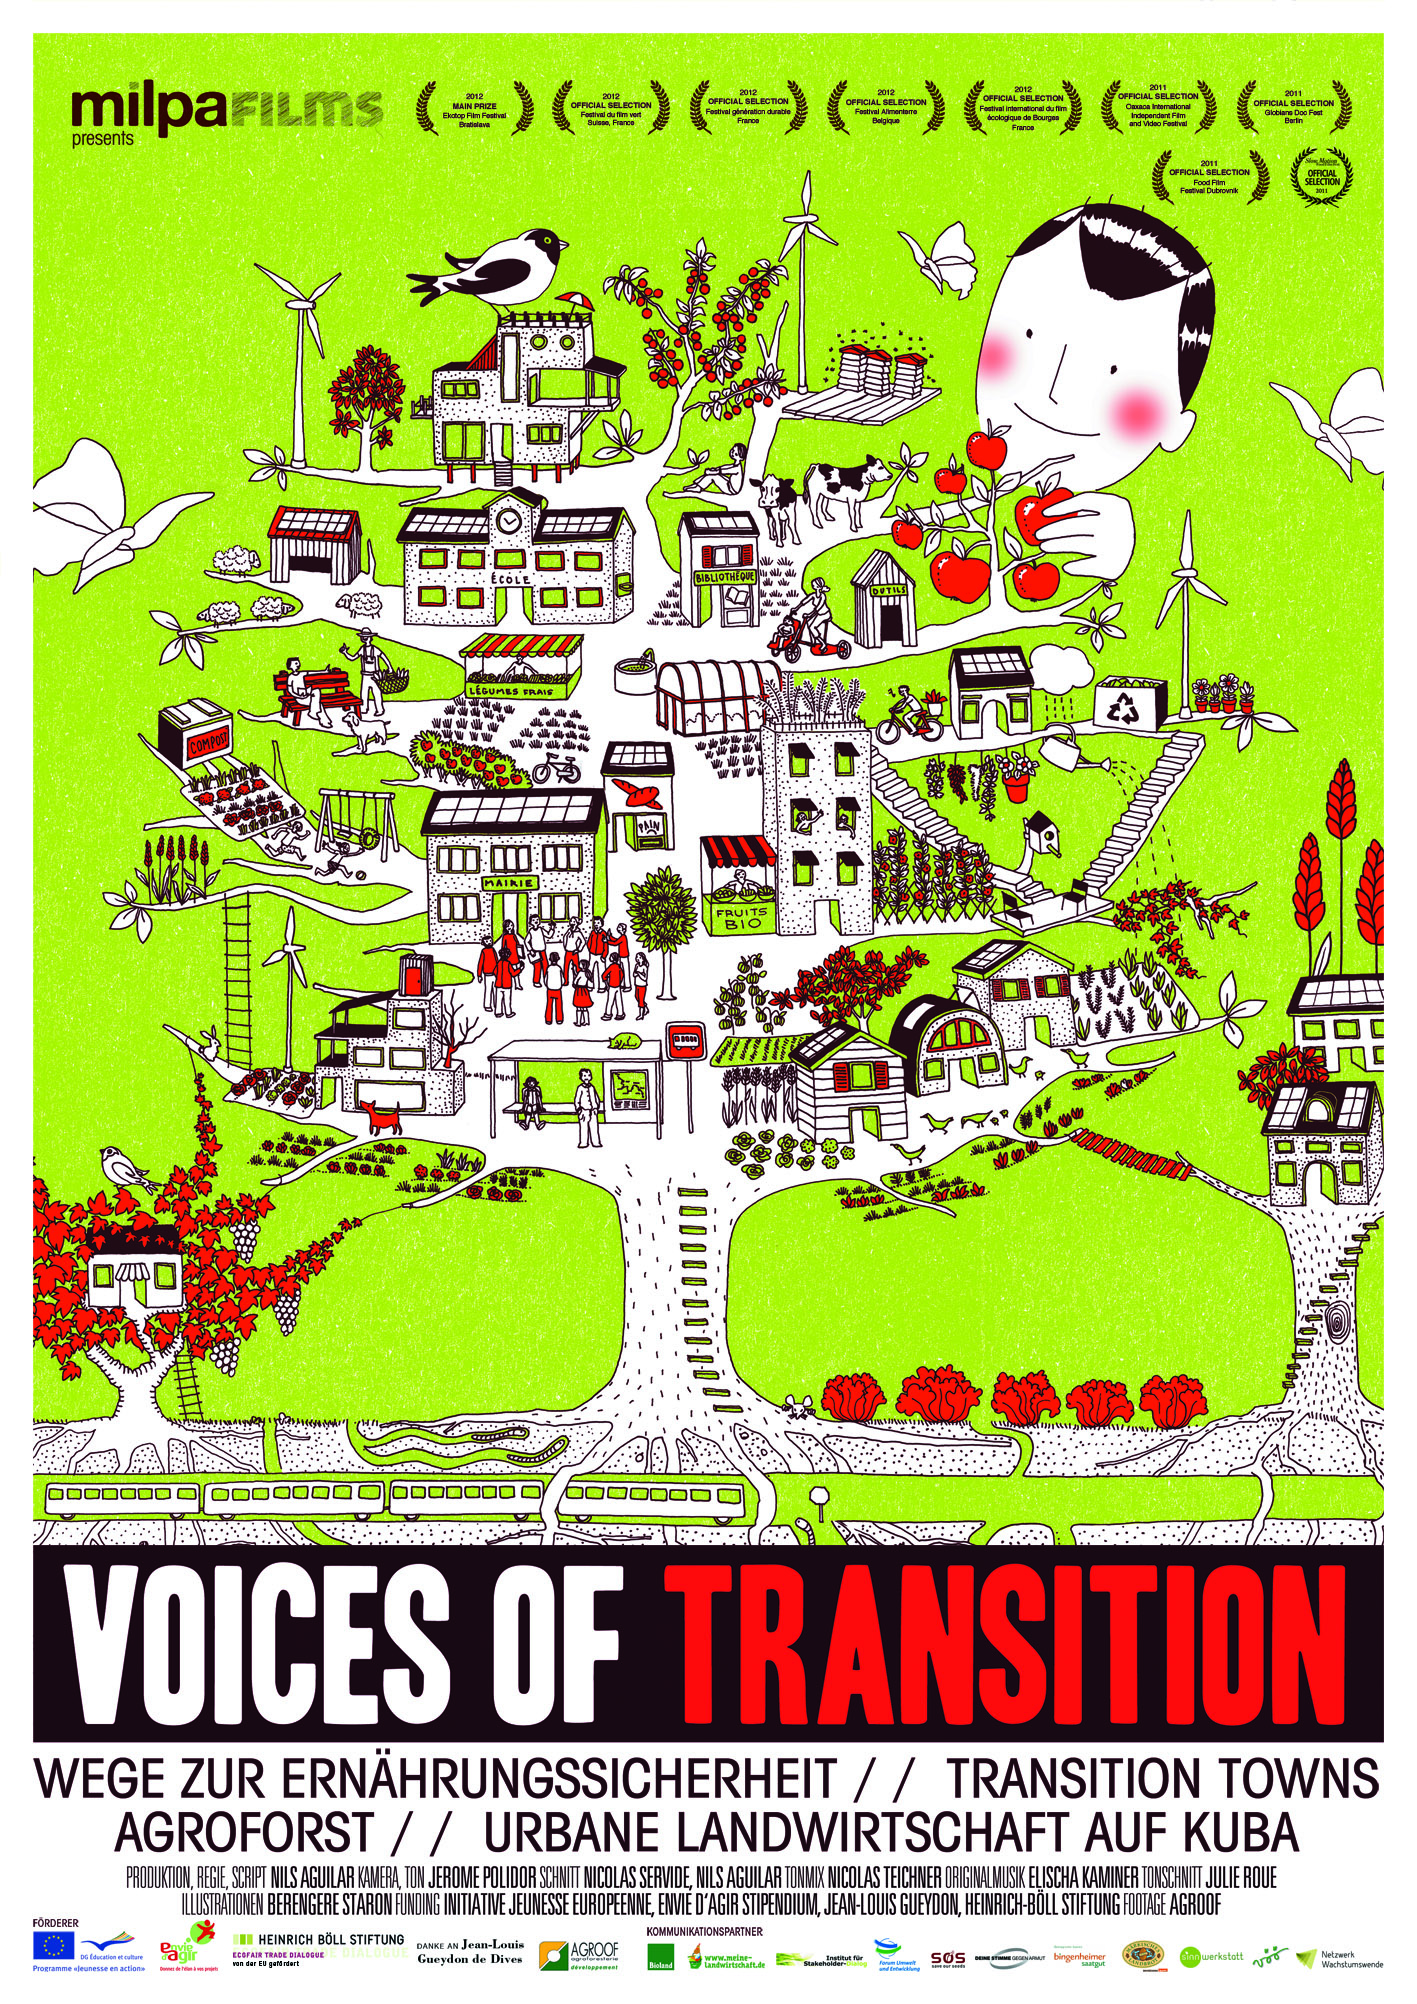 Voices of Transition | Environment & Society Portal